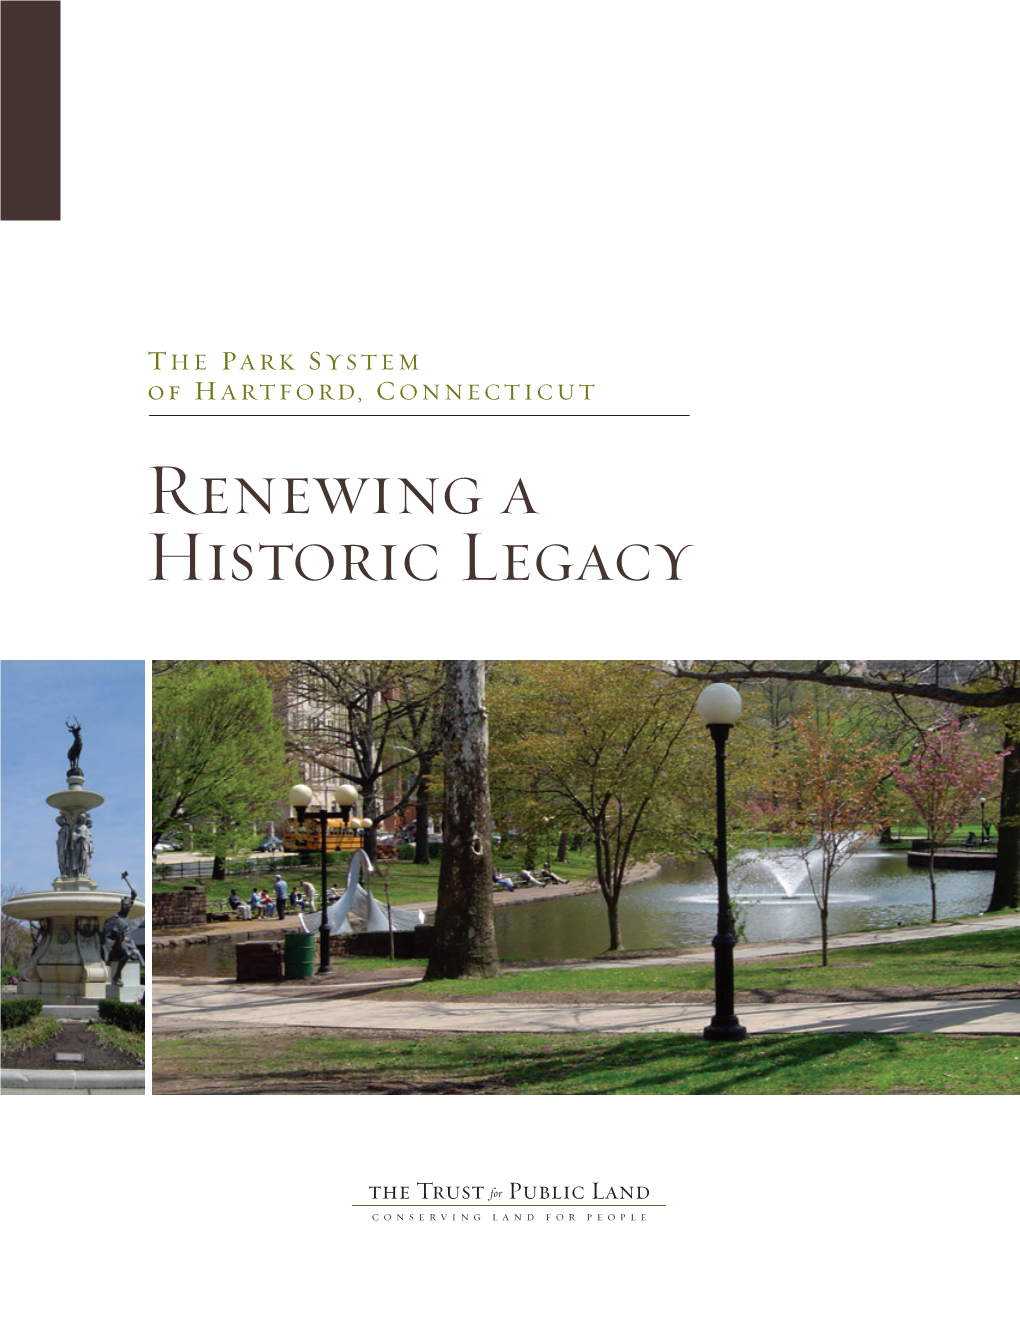 Renewing a Historic Legacy 4425 Cover:Tpl.Sph.Covrs.Fin.11.3 10/22/07 4:53 PM Page 2